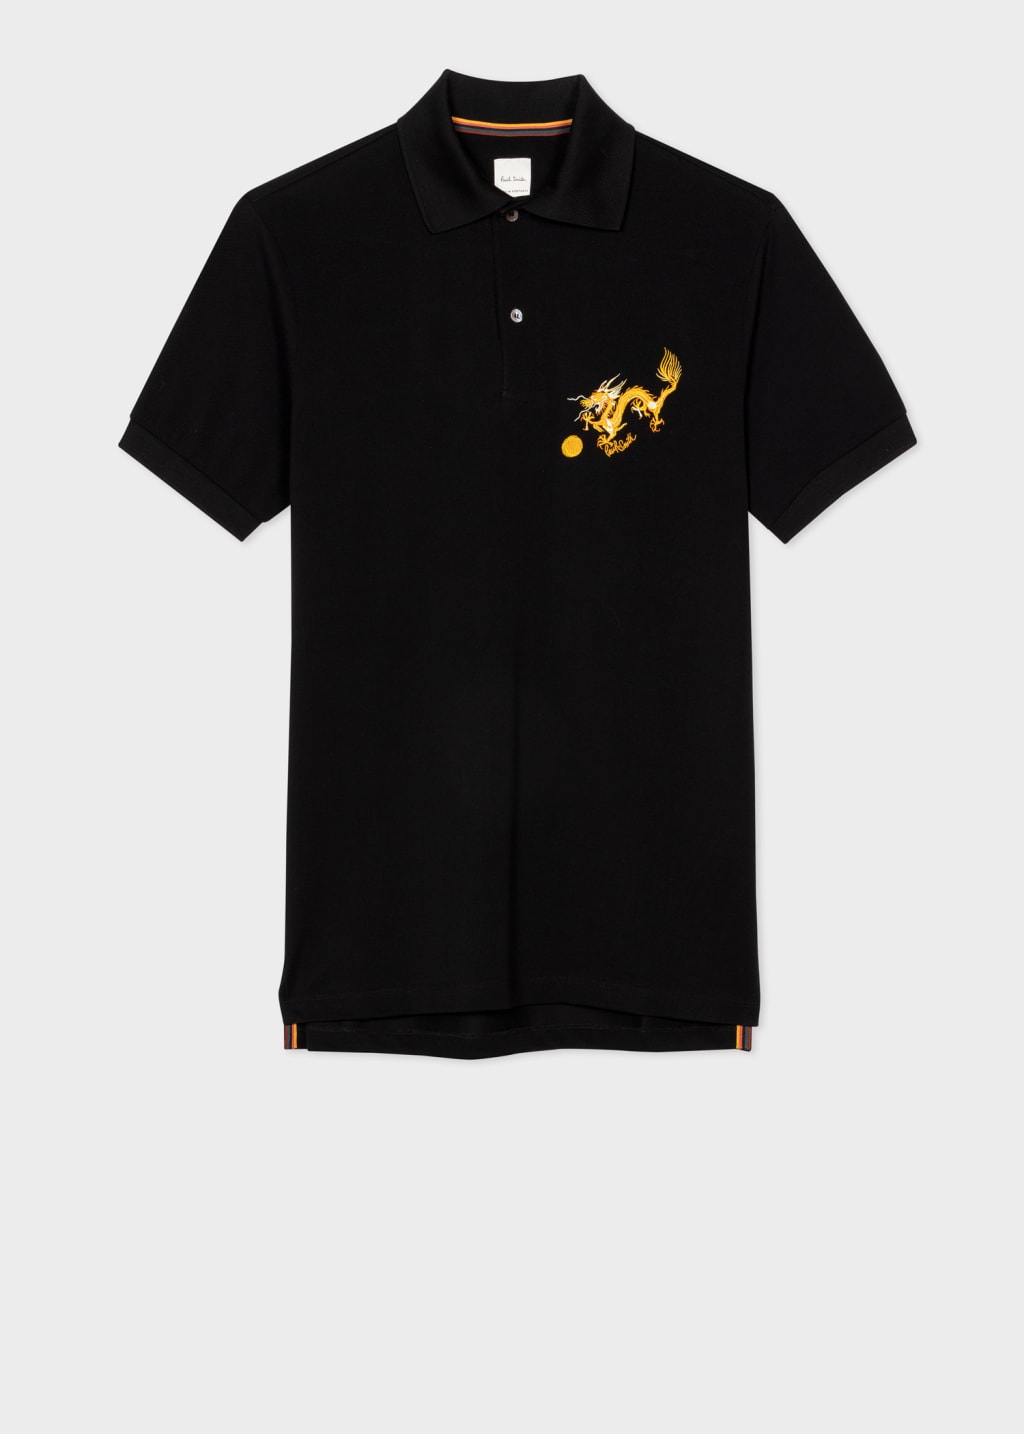 Front View - Black 'Year Of The Dragon' Embroidered Polo Shirt Paul Smith